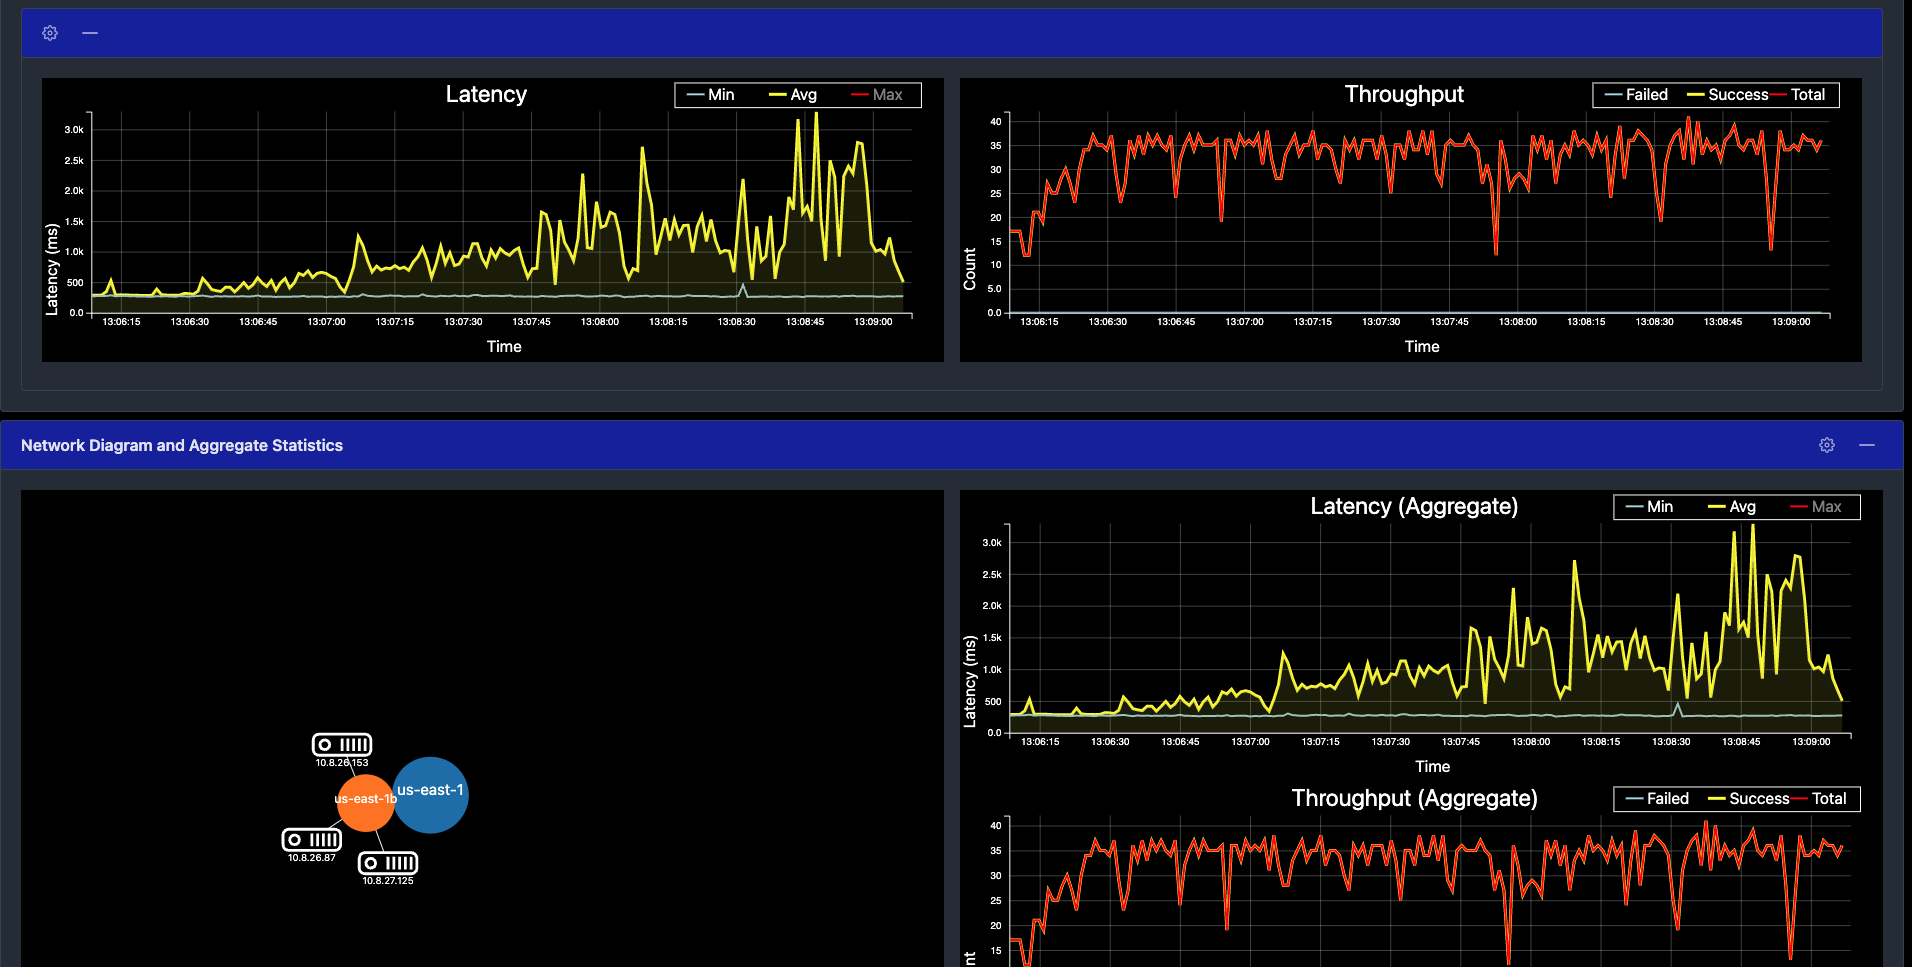 Latency and throughput with 3 nodes